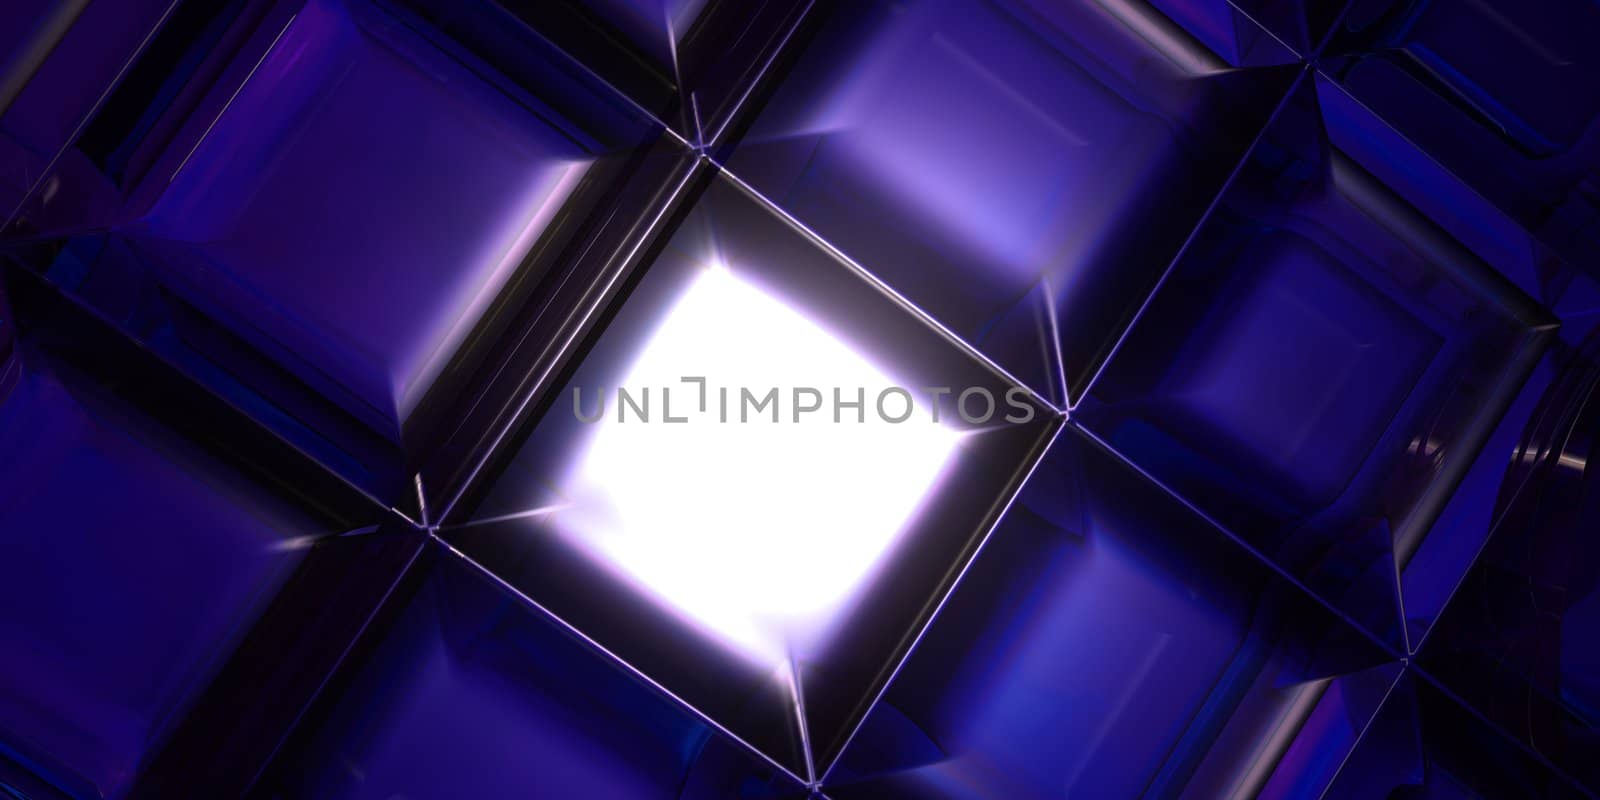 An illustration of a translucent squares rendered diagonally in a soft purplecolor tone.